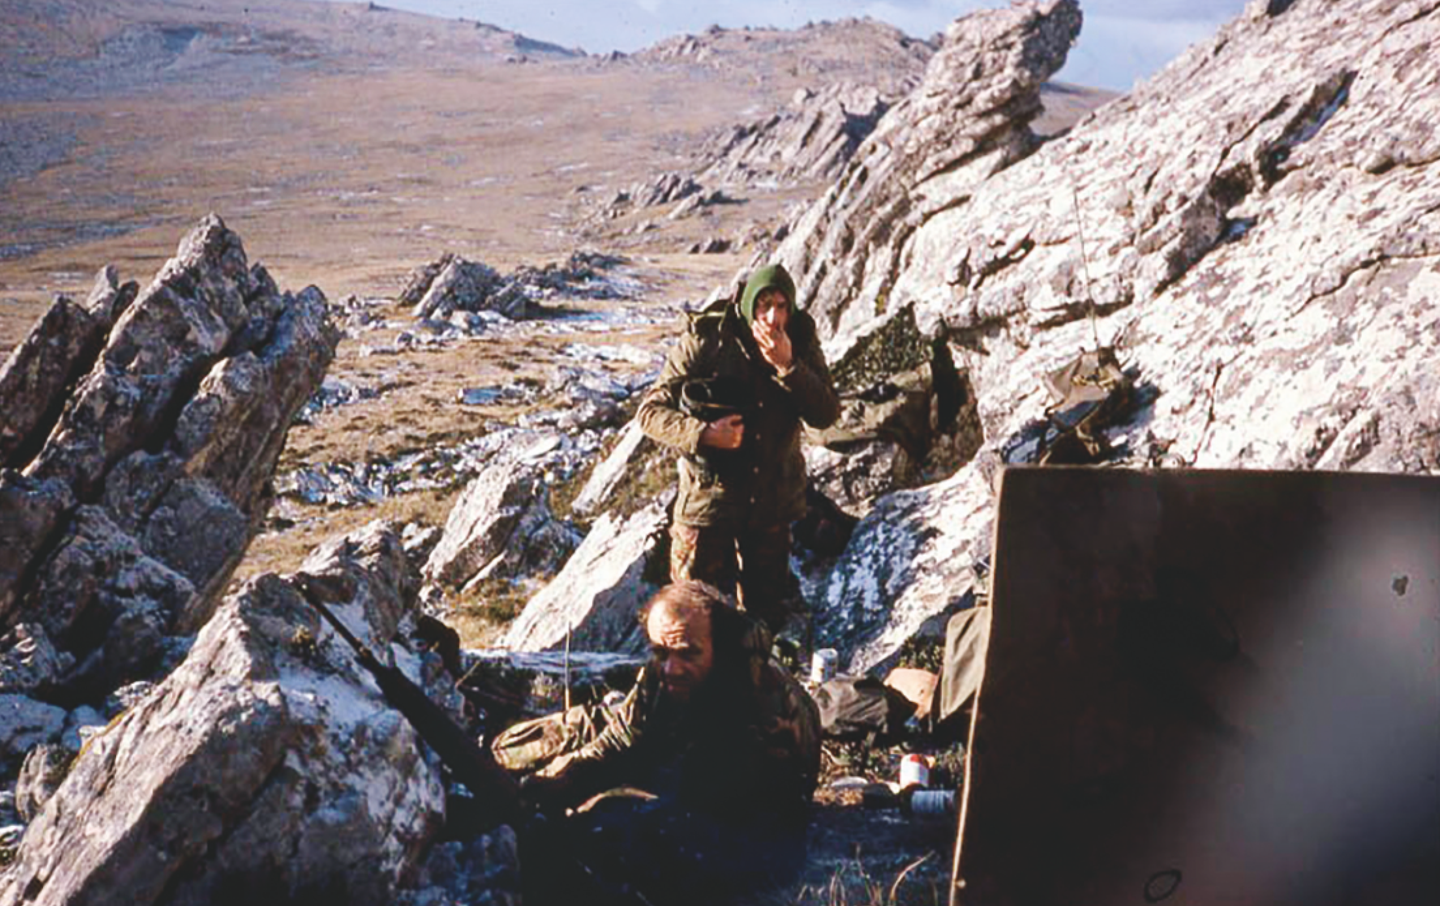 D Squadron’s headquarters position on Mount Kent. The Tacsat radio in the foreground was used to keep in touch with the CO of the regiment and their base back in Hereford, England. <em>Cedric Delves/Geordie Wood Collection</em>